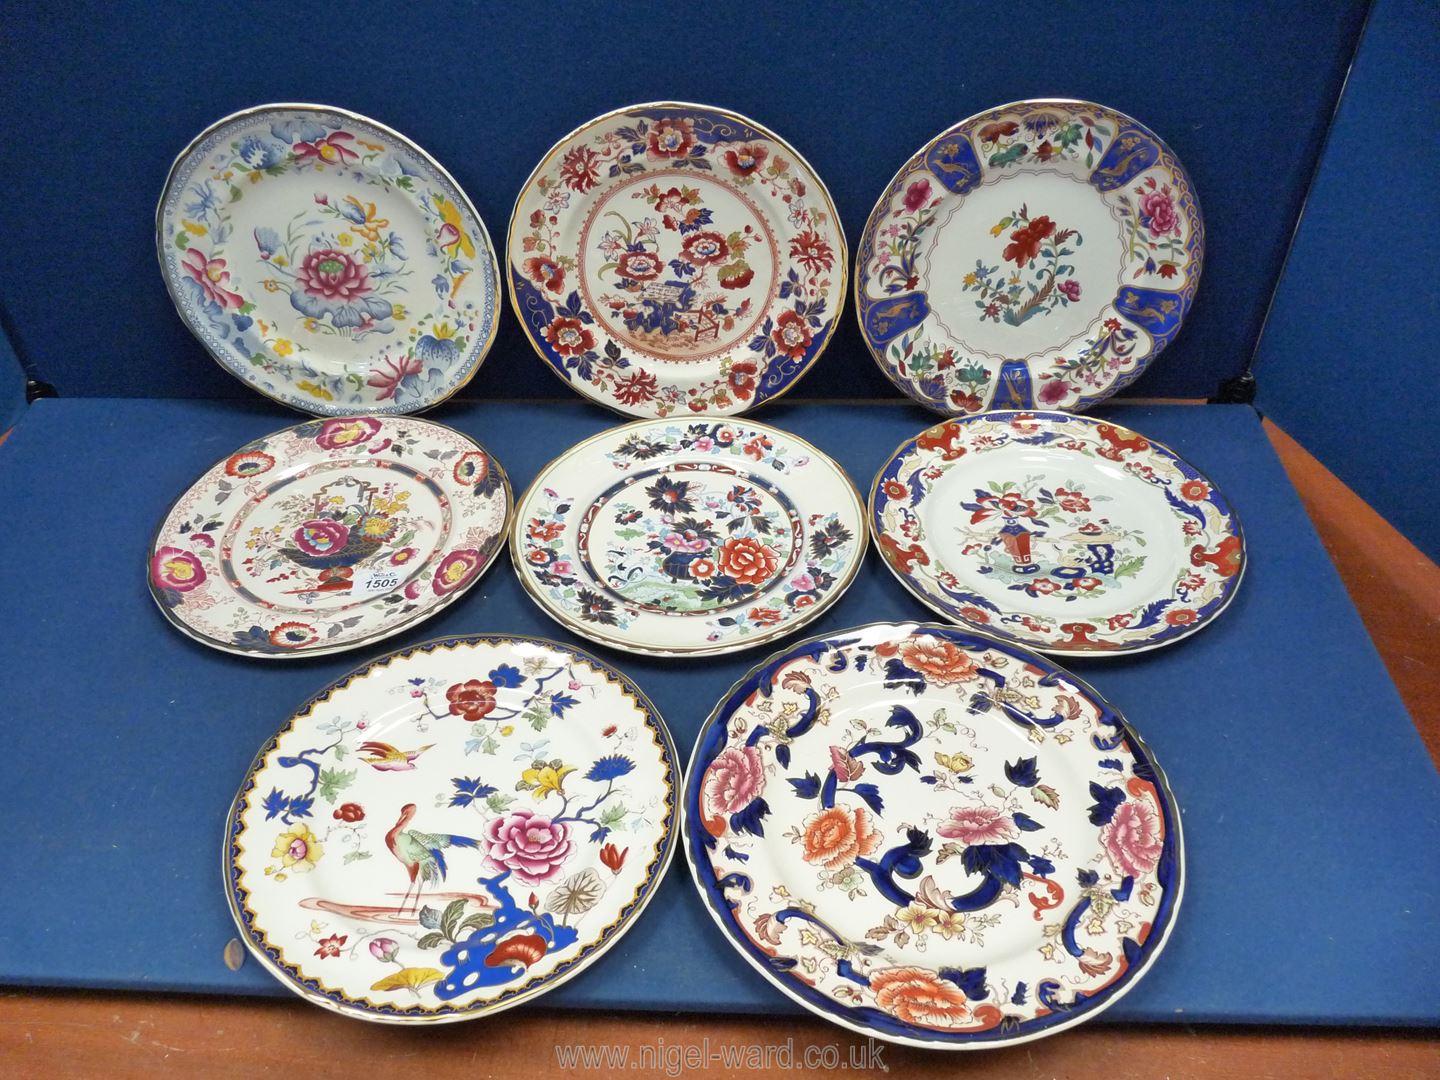 A good quantity of Mason's ironstone plates including 'Historic' collection and 'Mandalay'.